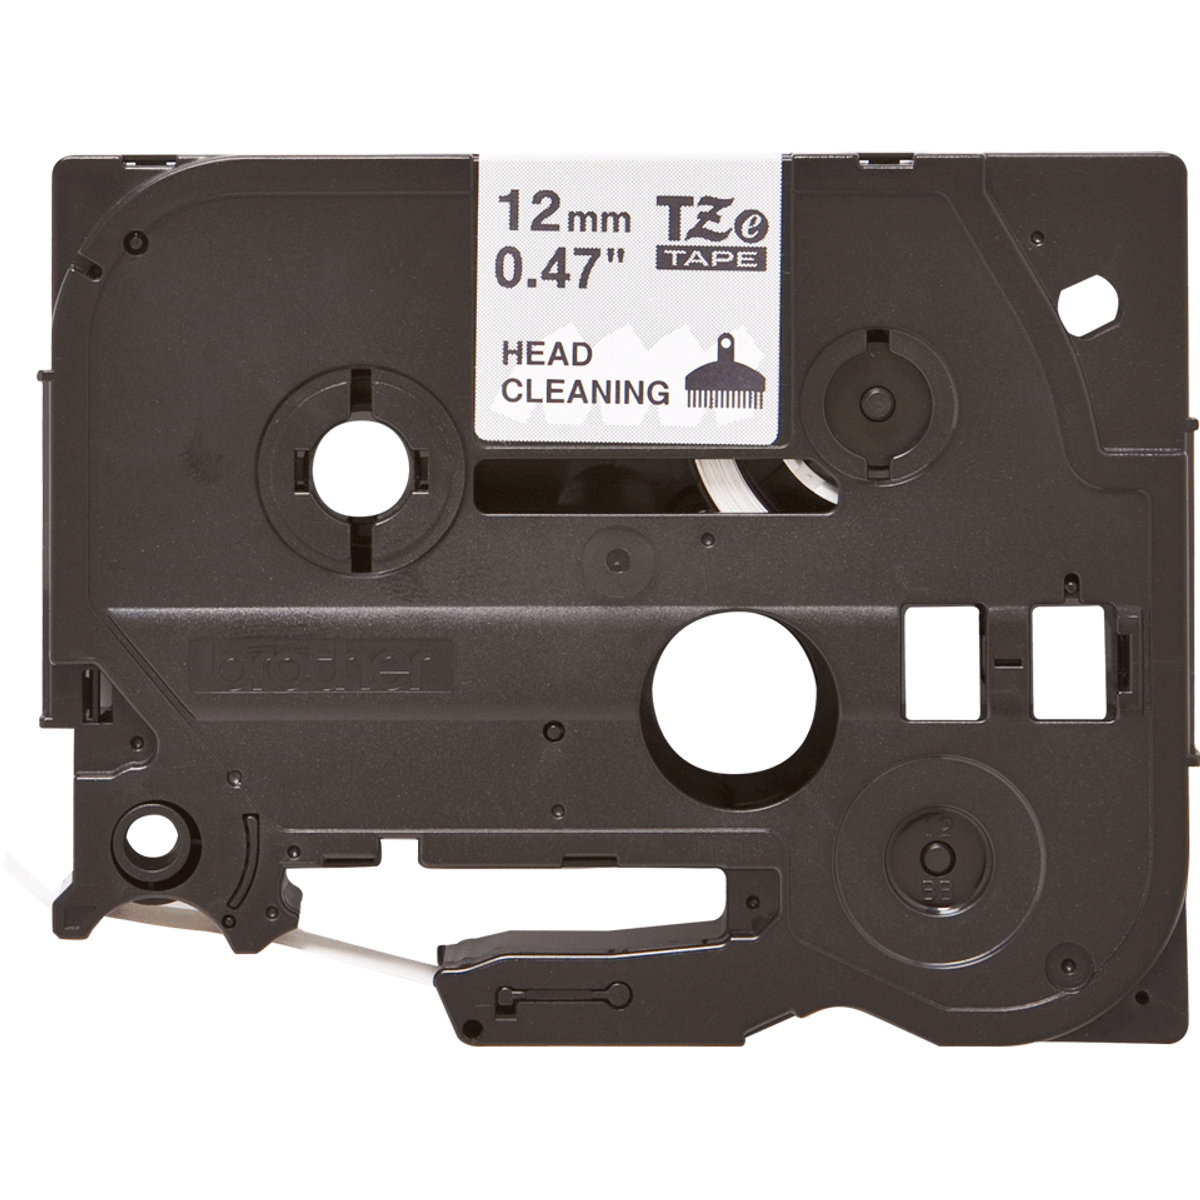 TZECL3 12mm Head Cleaning Label Tape